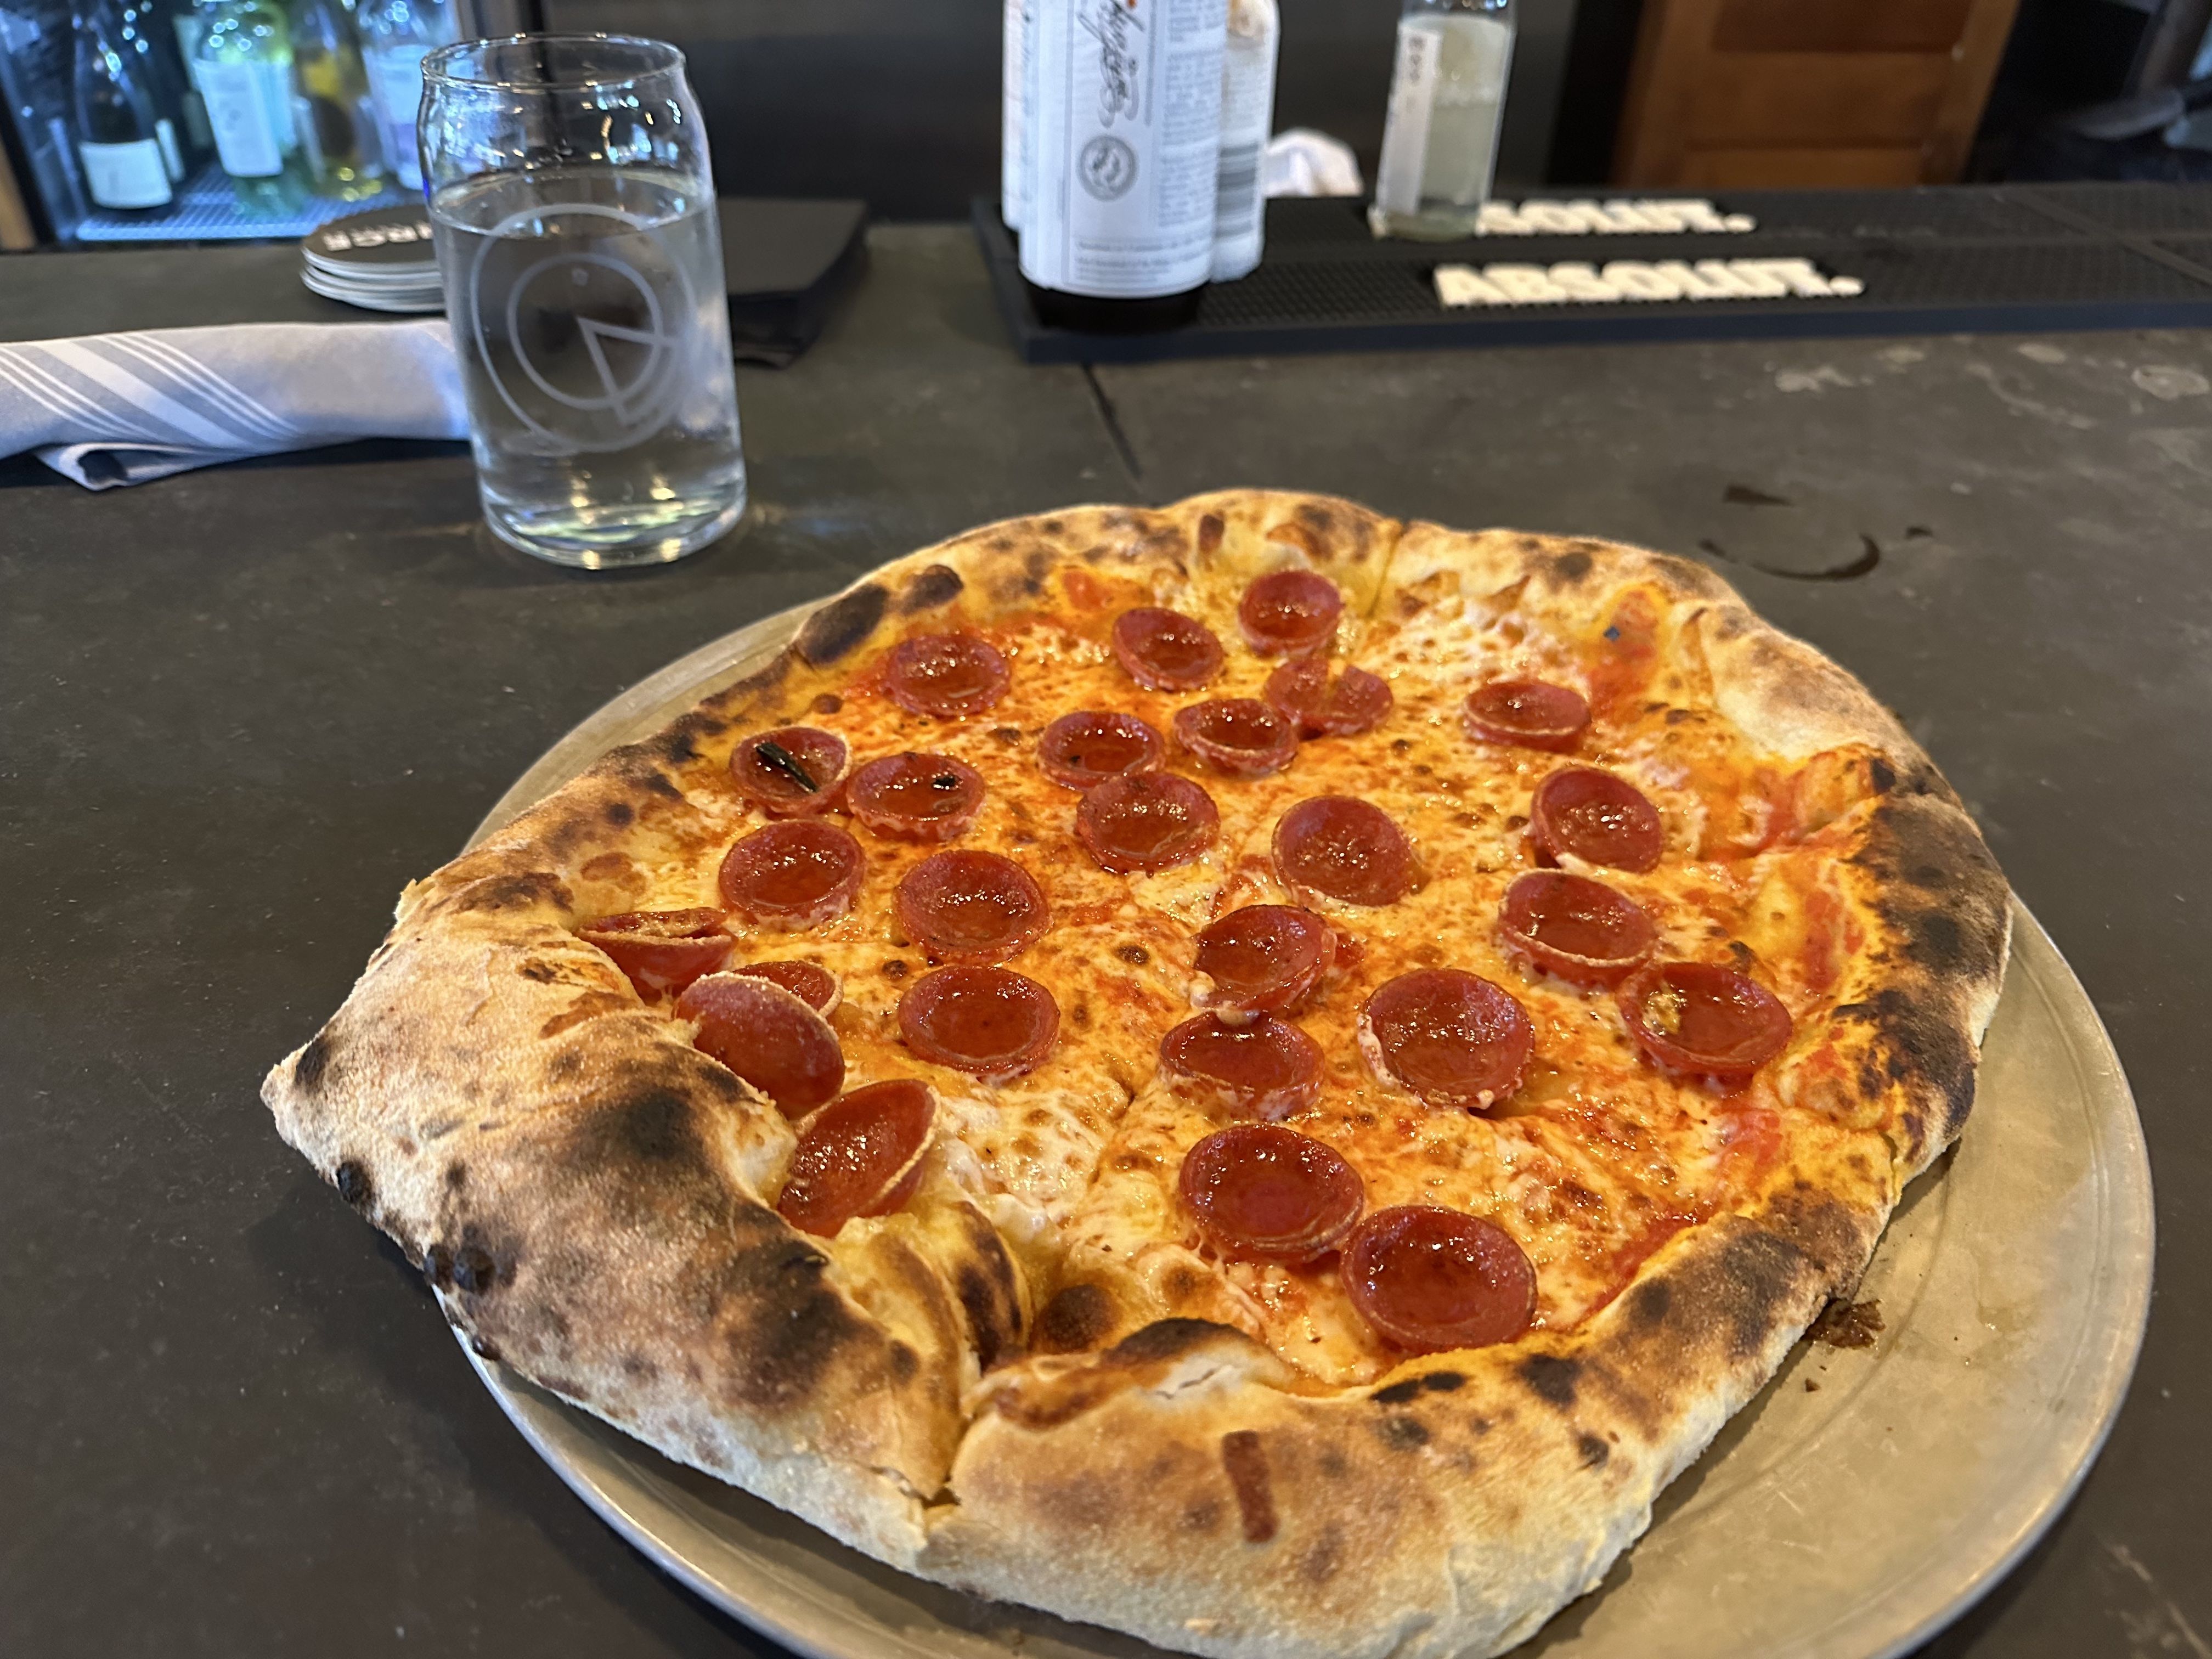 A pepperoni pizza from Source in Cambridge.